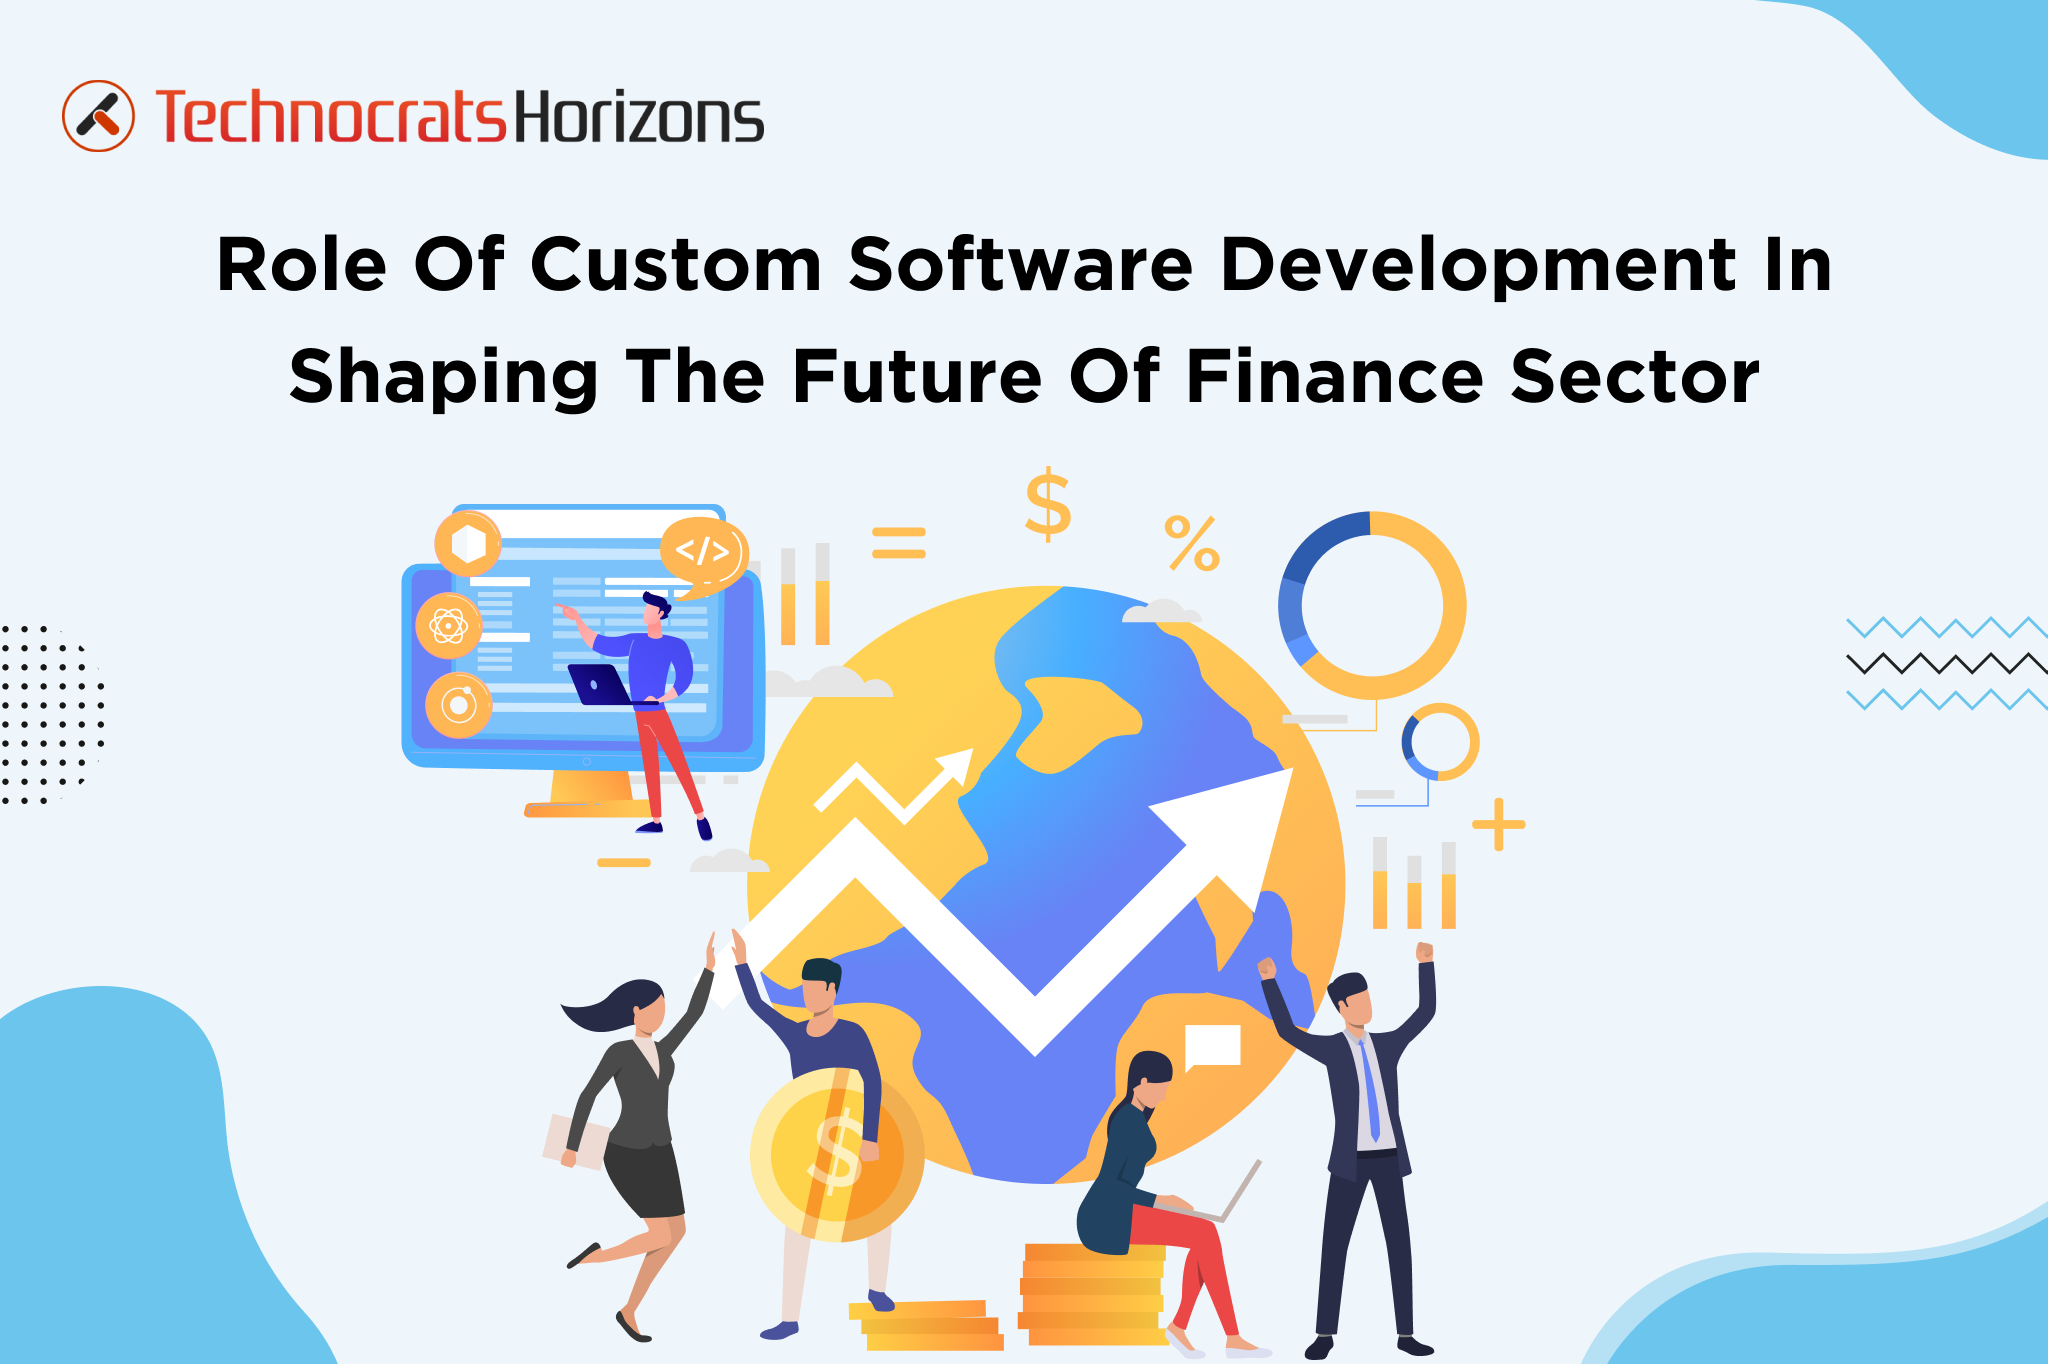 How Custom Software Development Is Transforming the Finance Sector